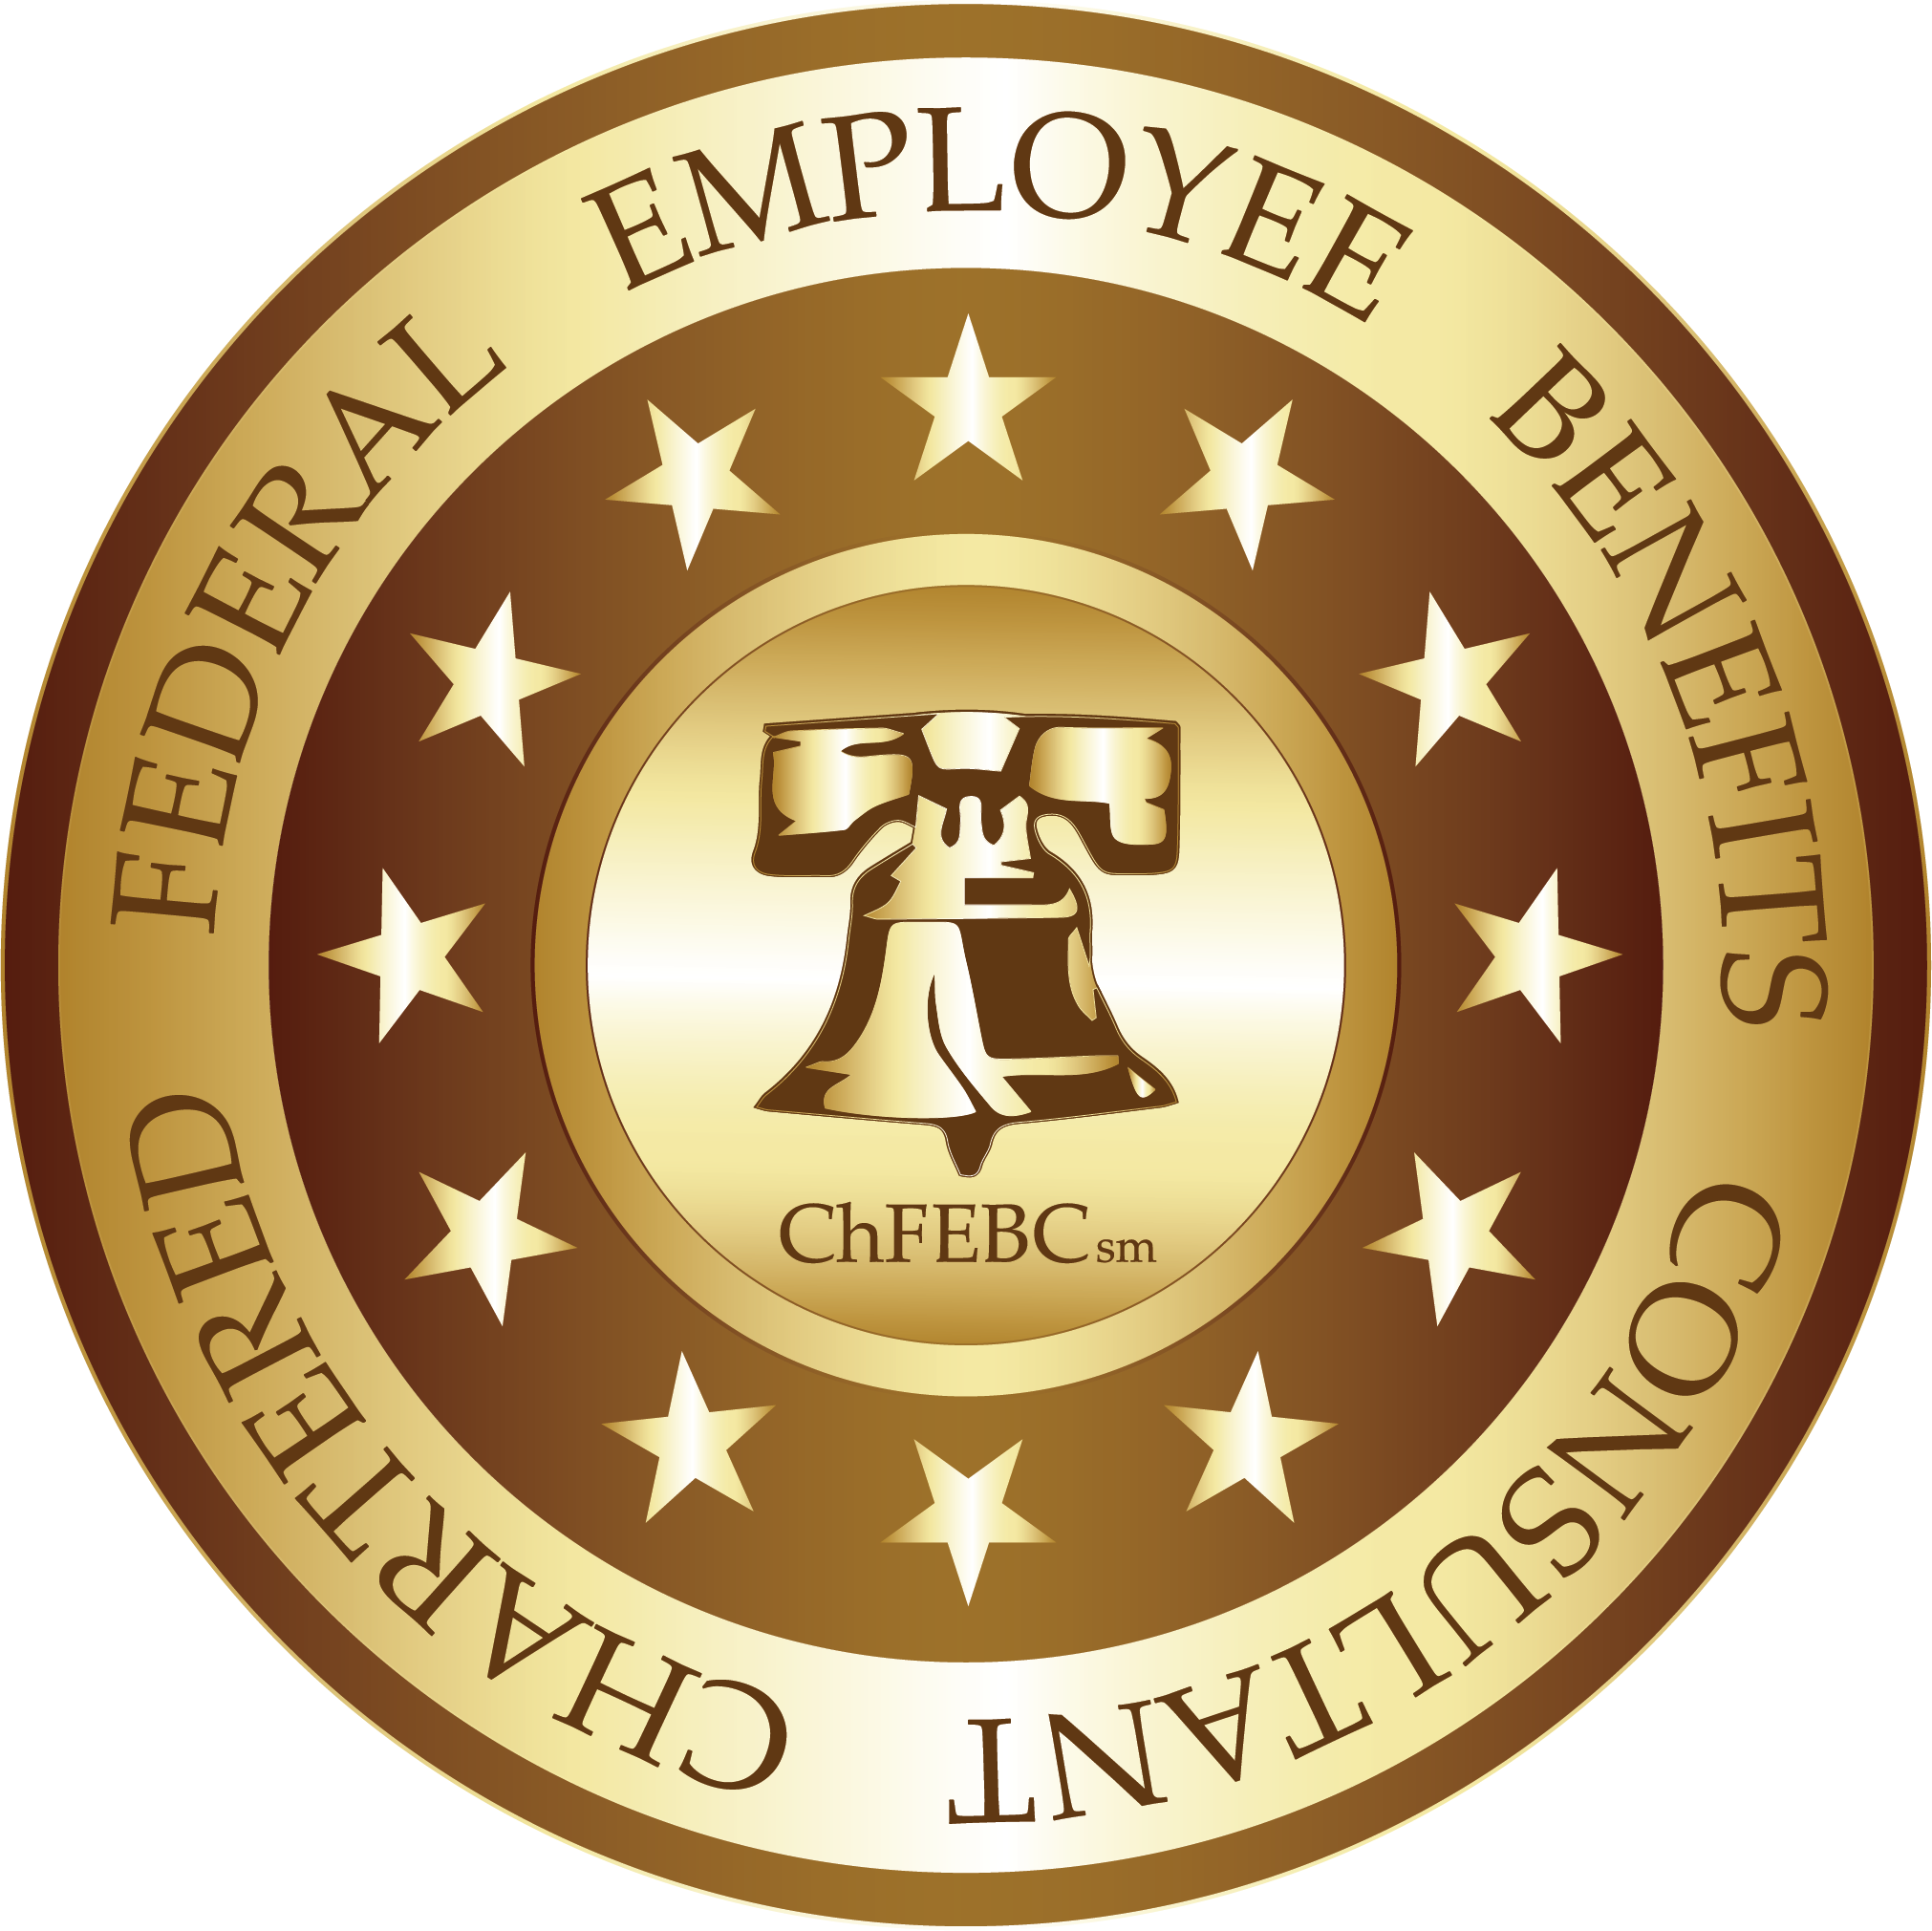 CHARTERED FEDERAL EMPLOYEE BENEFITS CONSULTANT LOGO